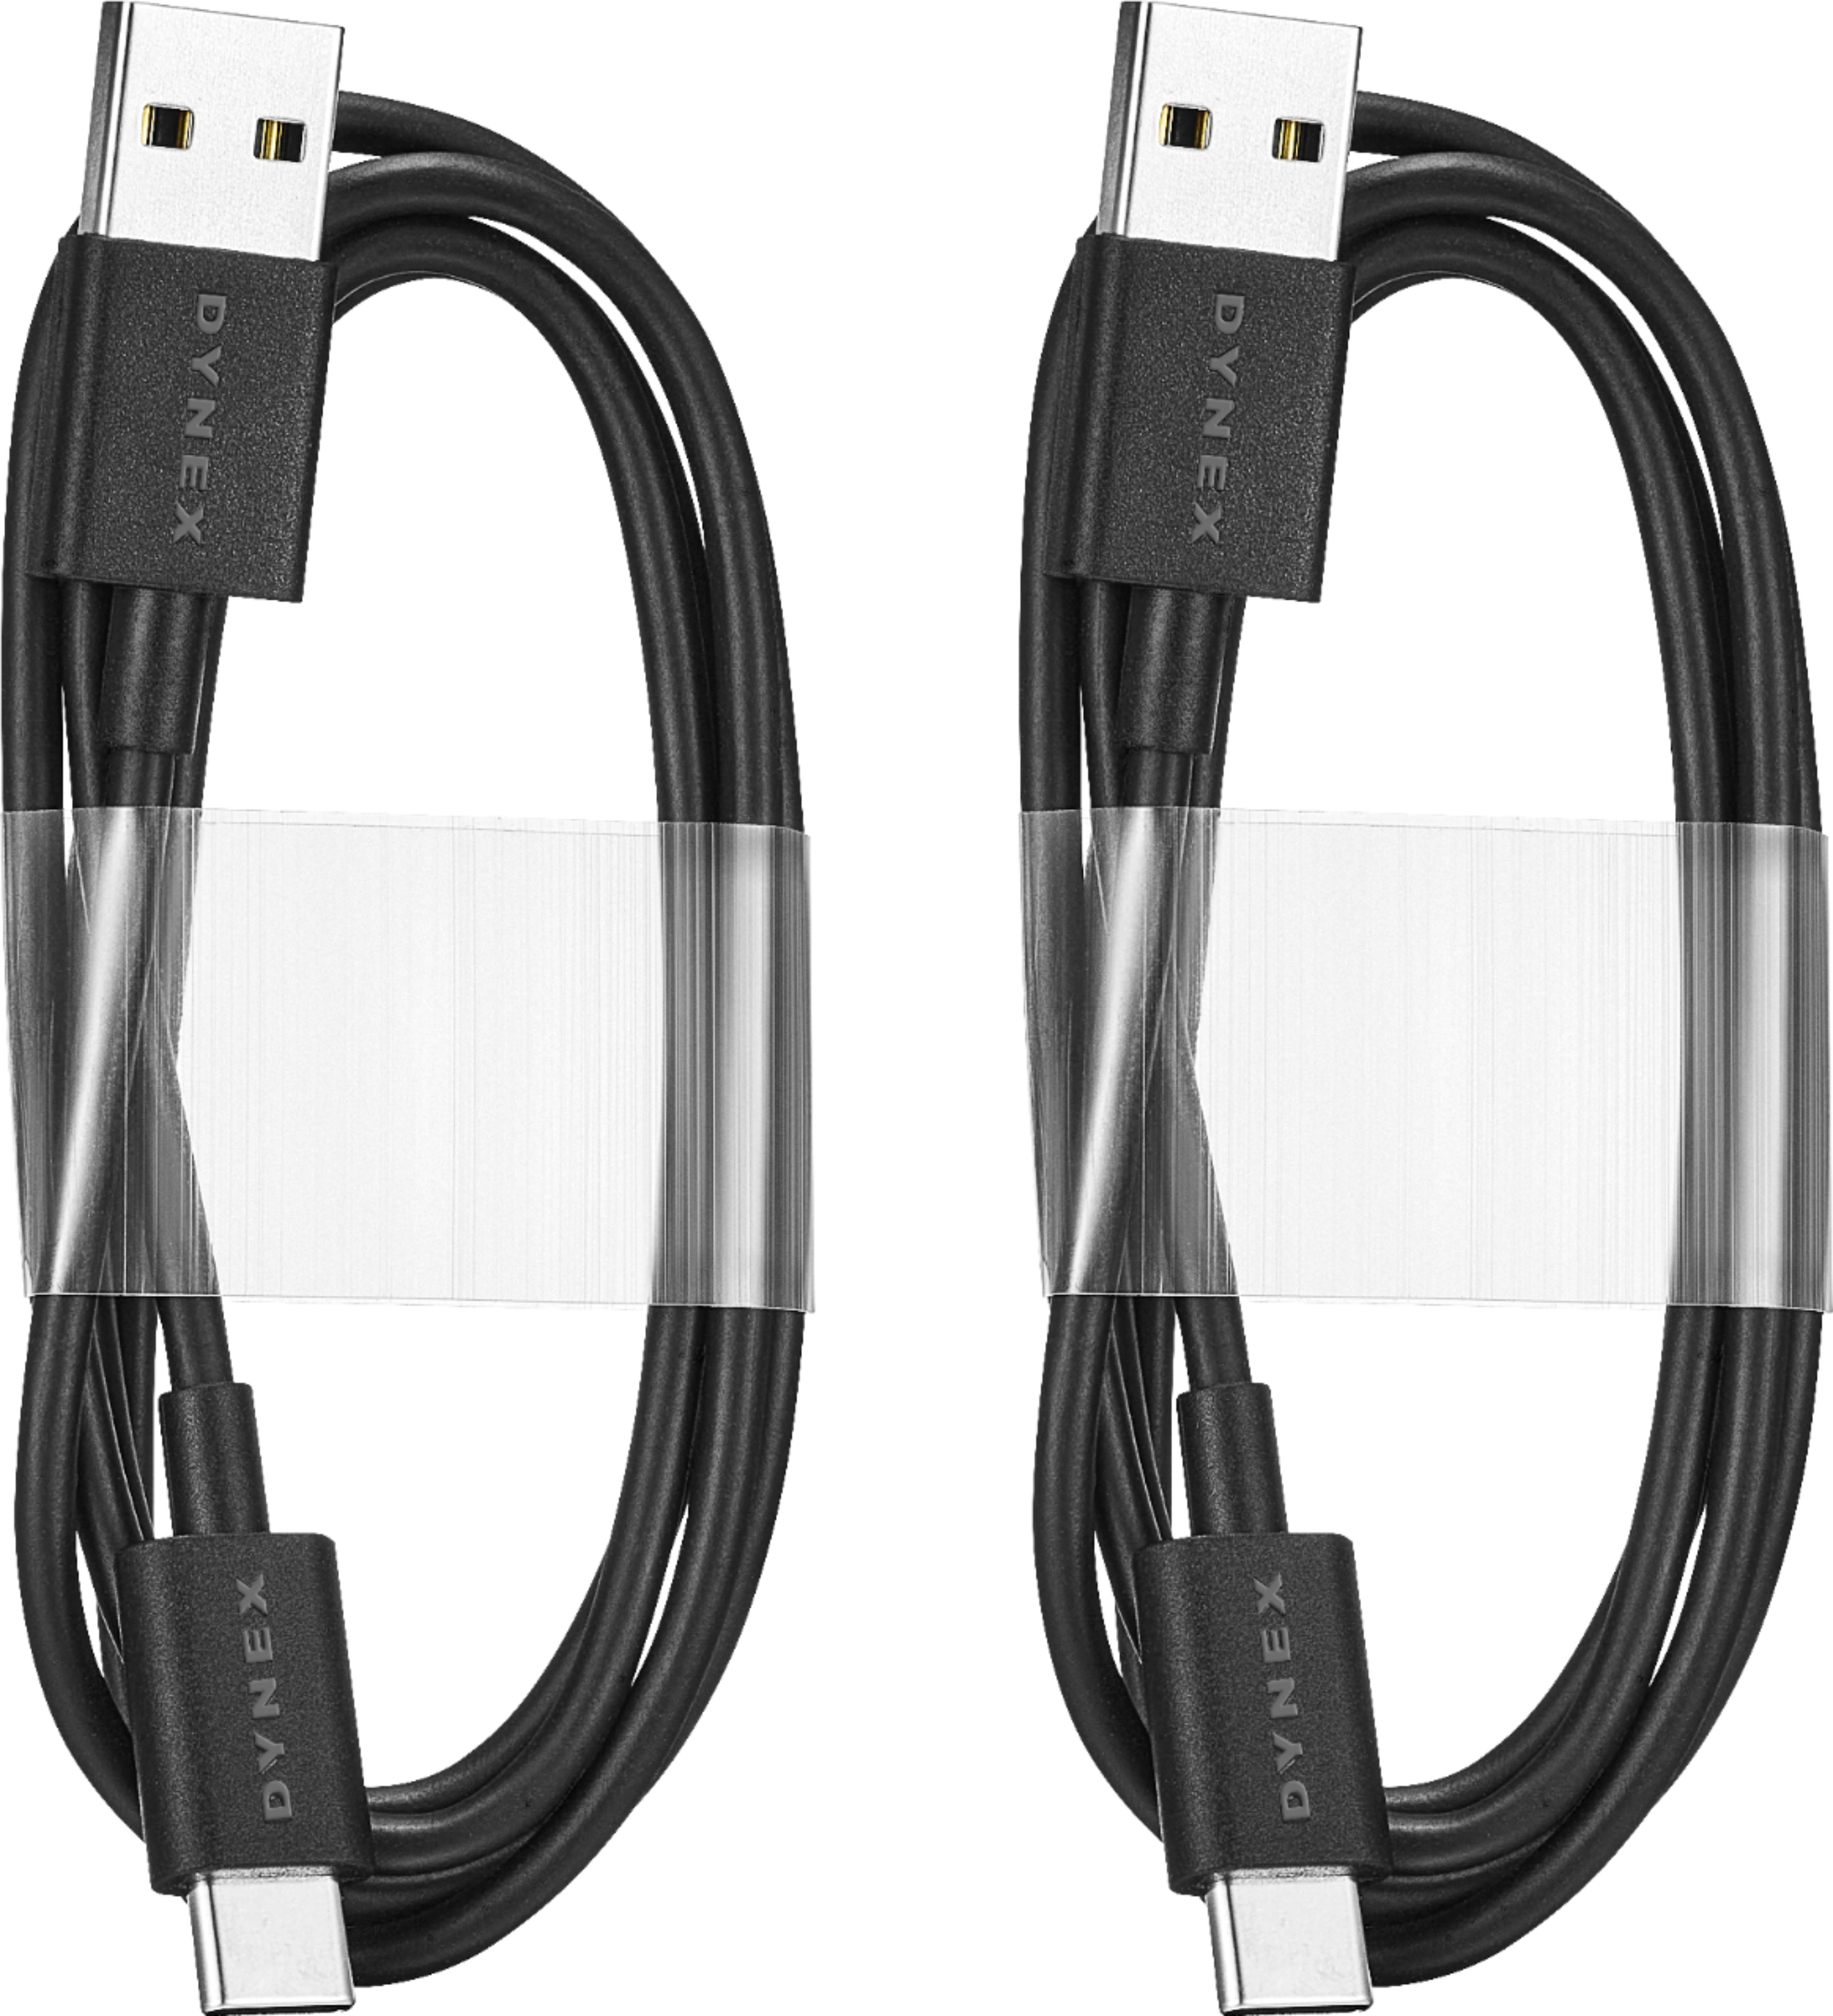 Left View: j5create - USB Type-C to 4k DisplayPort Adapter cable - White